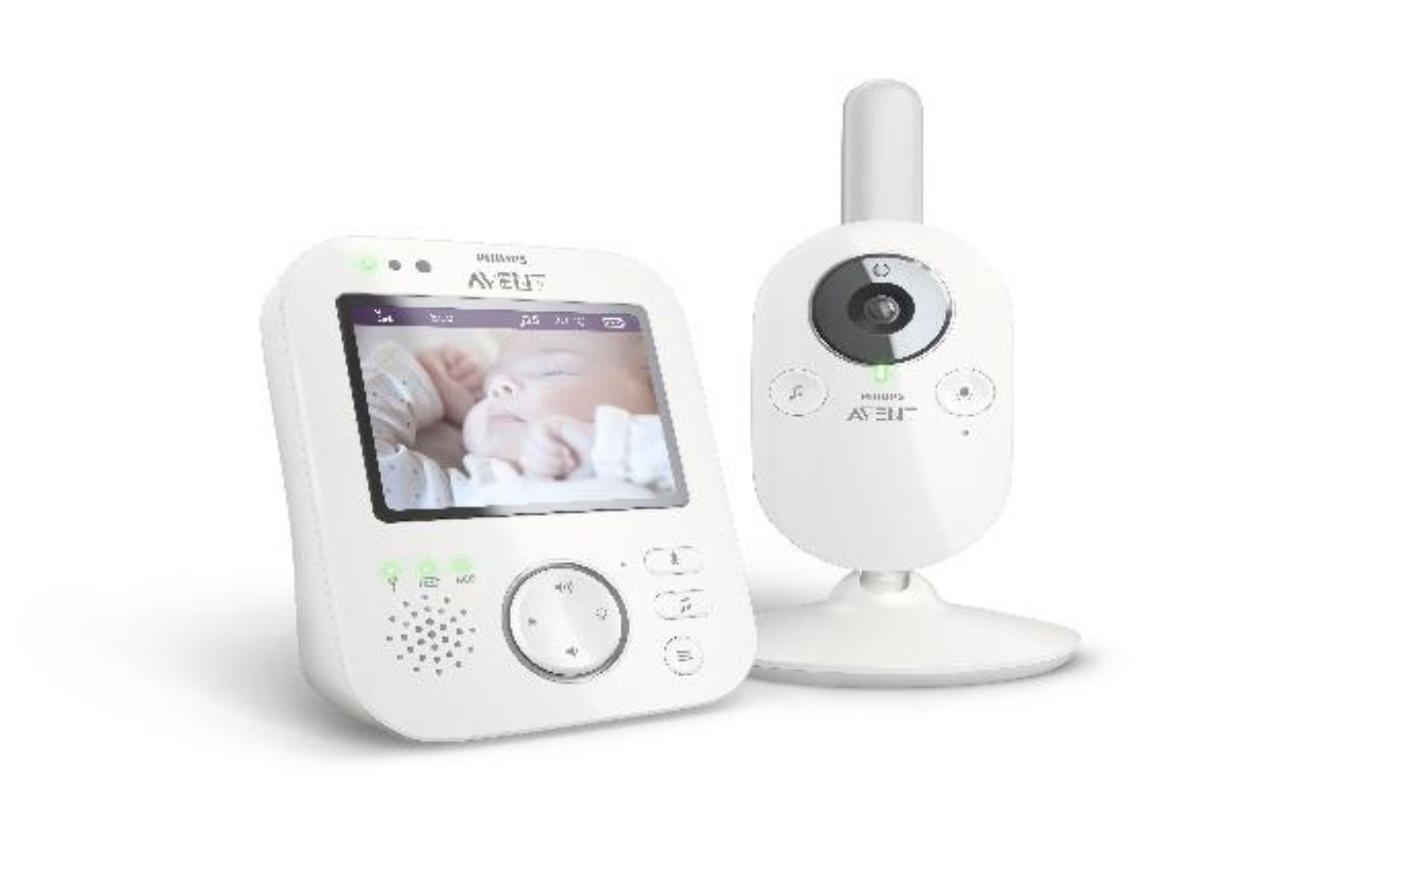 Philips Avent Digital Video Baby Monitors Recalled by Philips Personal  Health Due to Burn Hazard